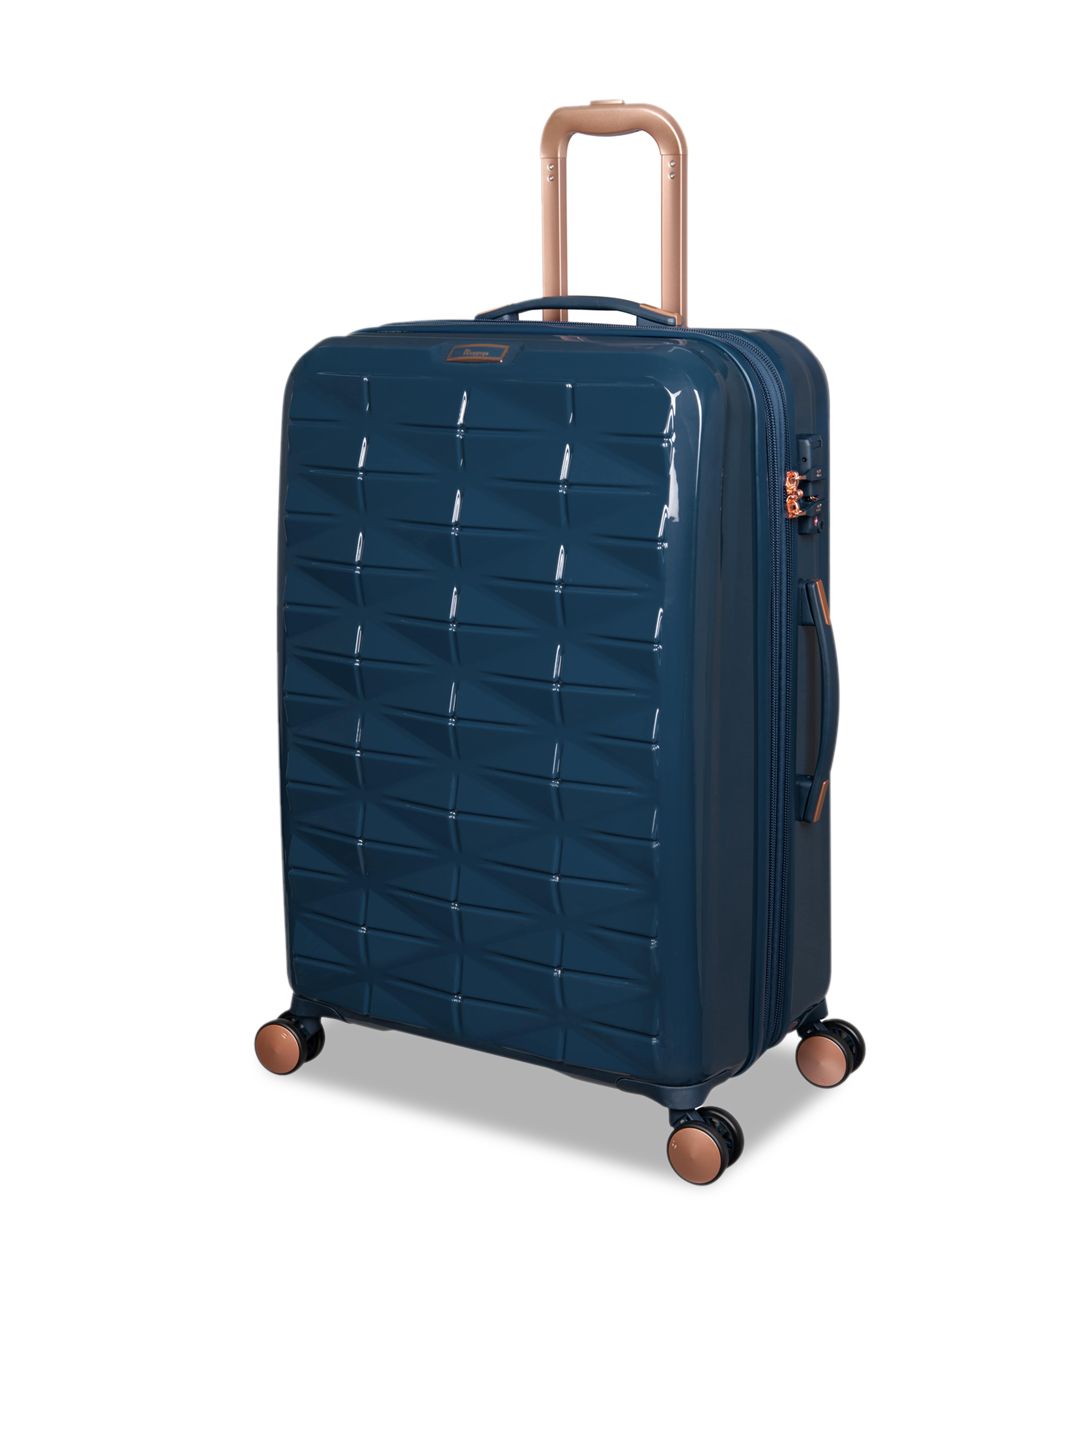 IT luggage Blue Textured Hard-Sided Trolley Bag Price in India